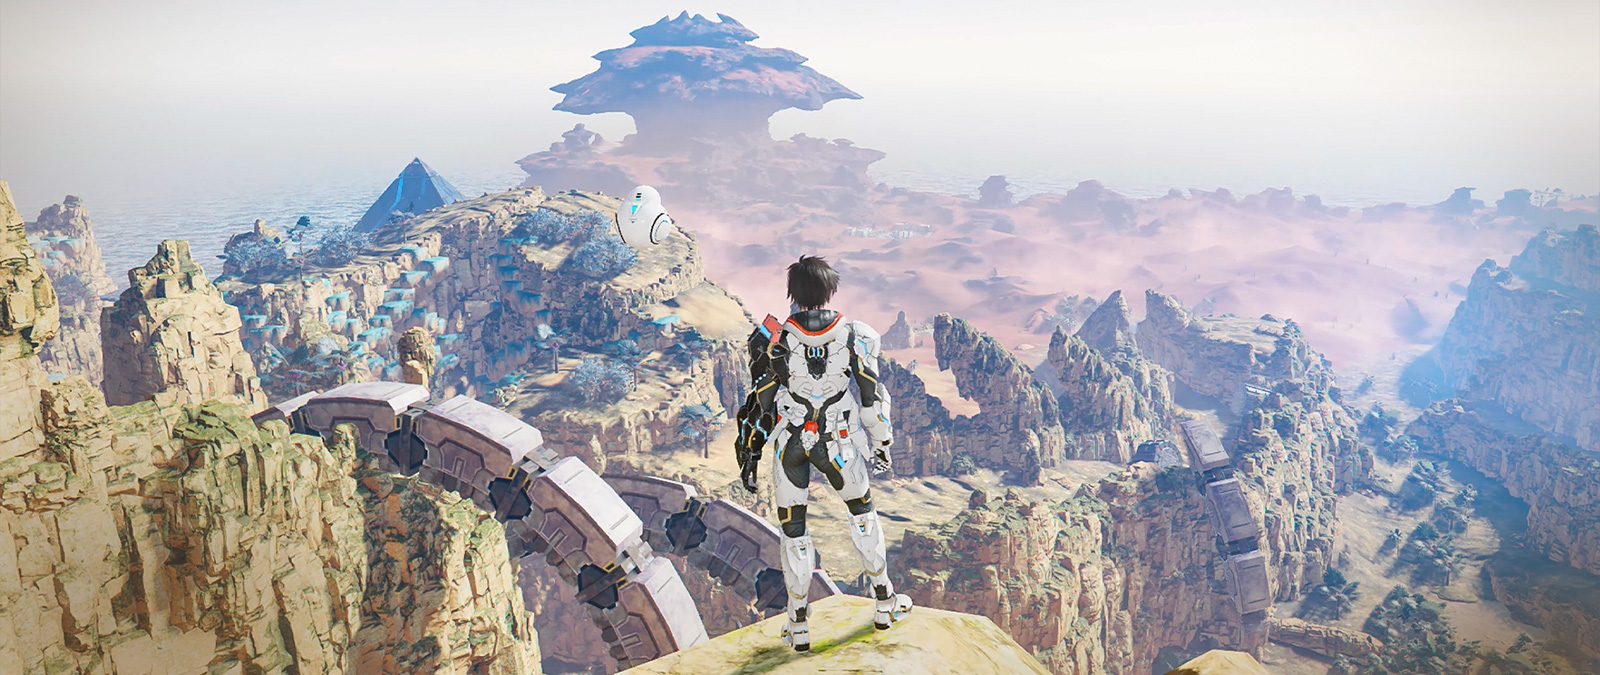 A character wearing power armour stands on a clifftop looking over a valley.